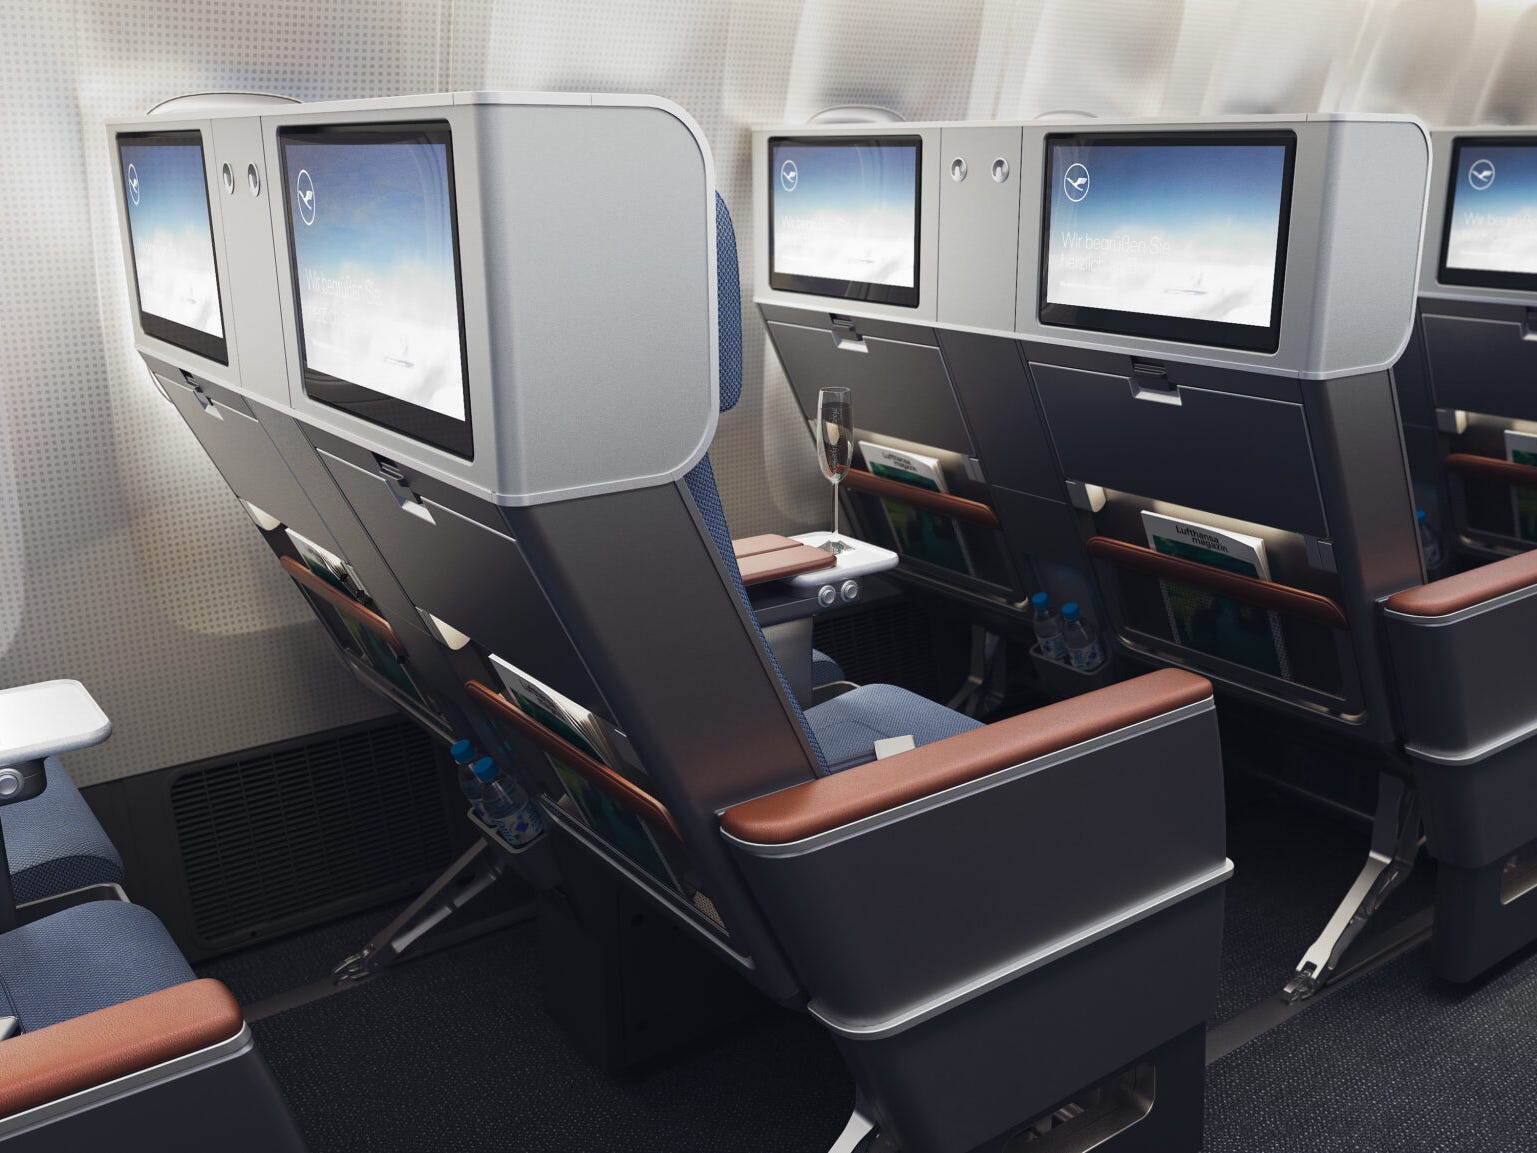 <p>A large 15.6-inch television with Bluetooth connectivity, a USB port and universal power outlet, an adjustable headrest, leather armrests, and a cocktail table between the seats also will await flyers, the airline said.</p>